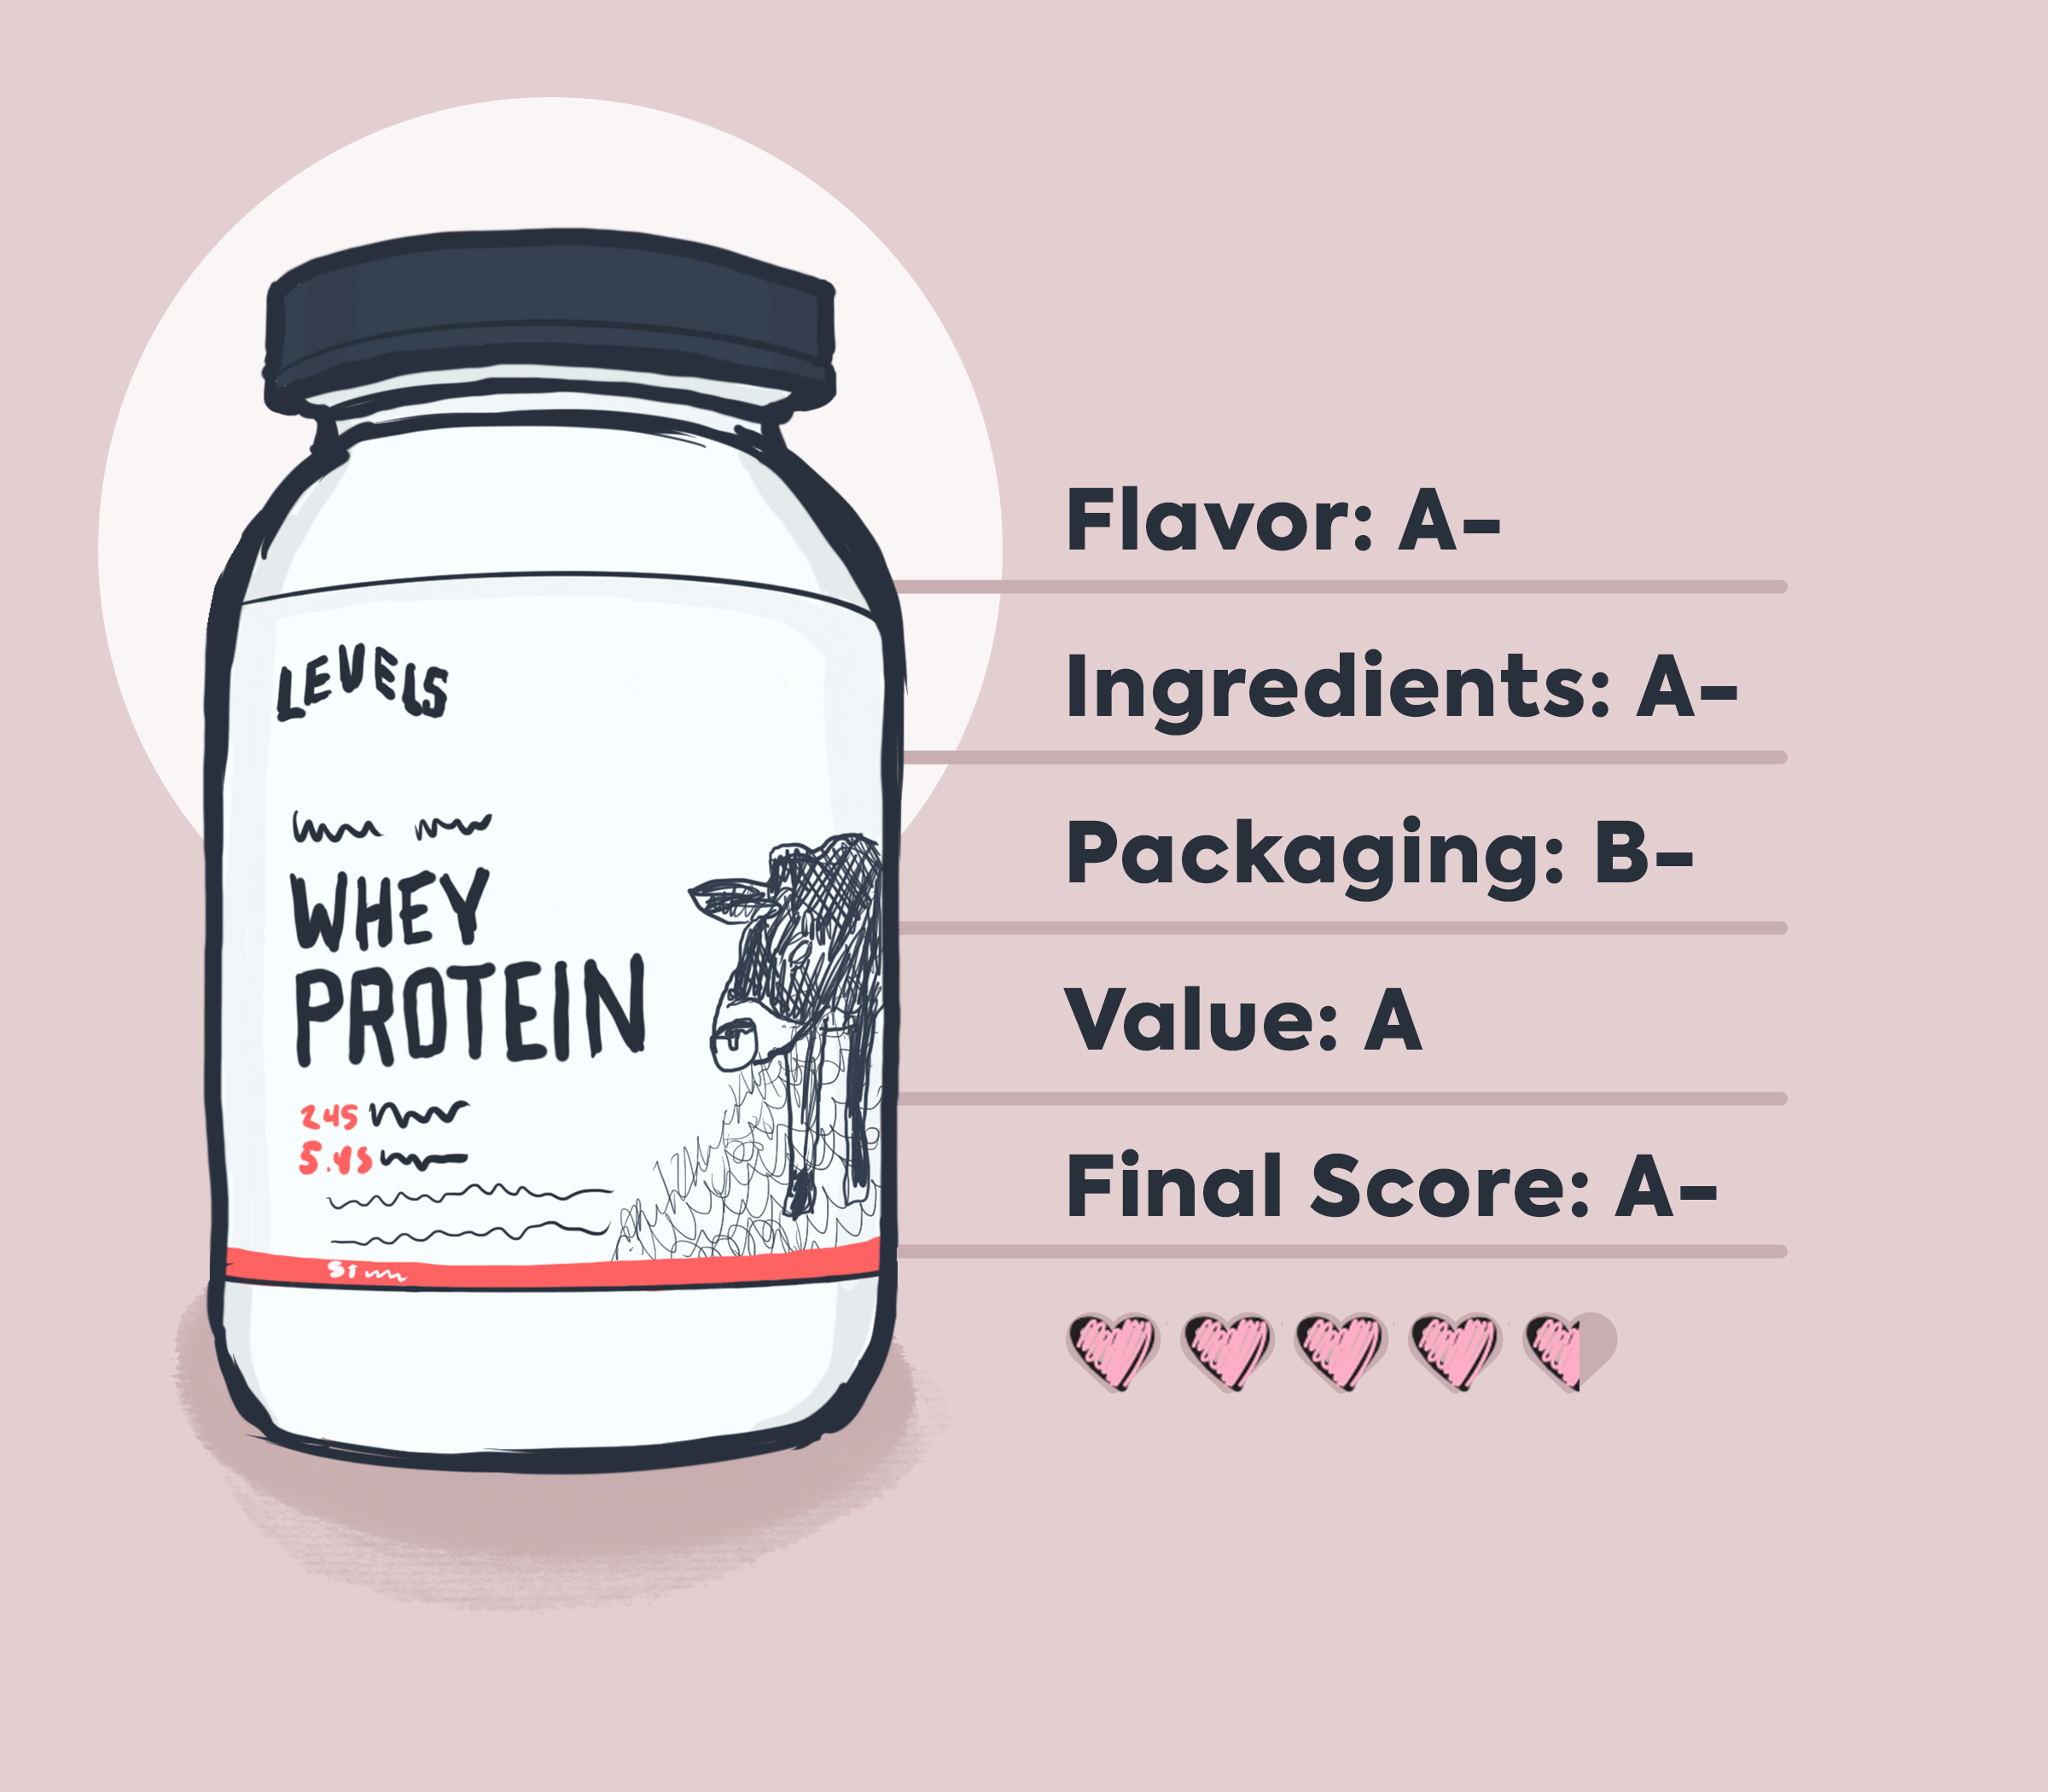 Levels Grass-Fed Protein review inforgraphic - cartoon product illustration with review details in text overlay